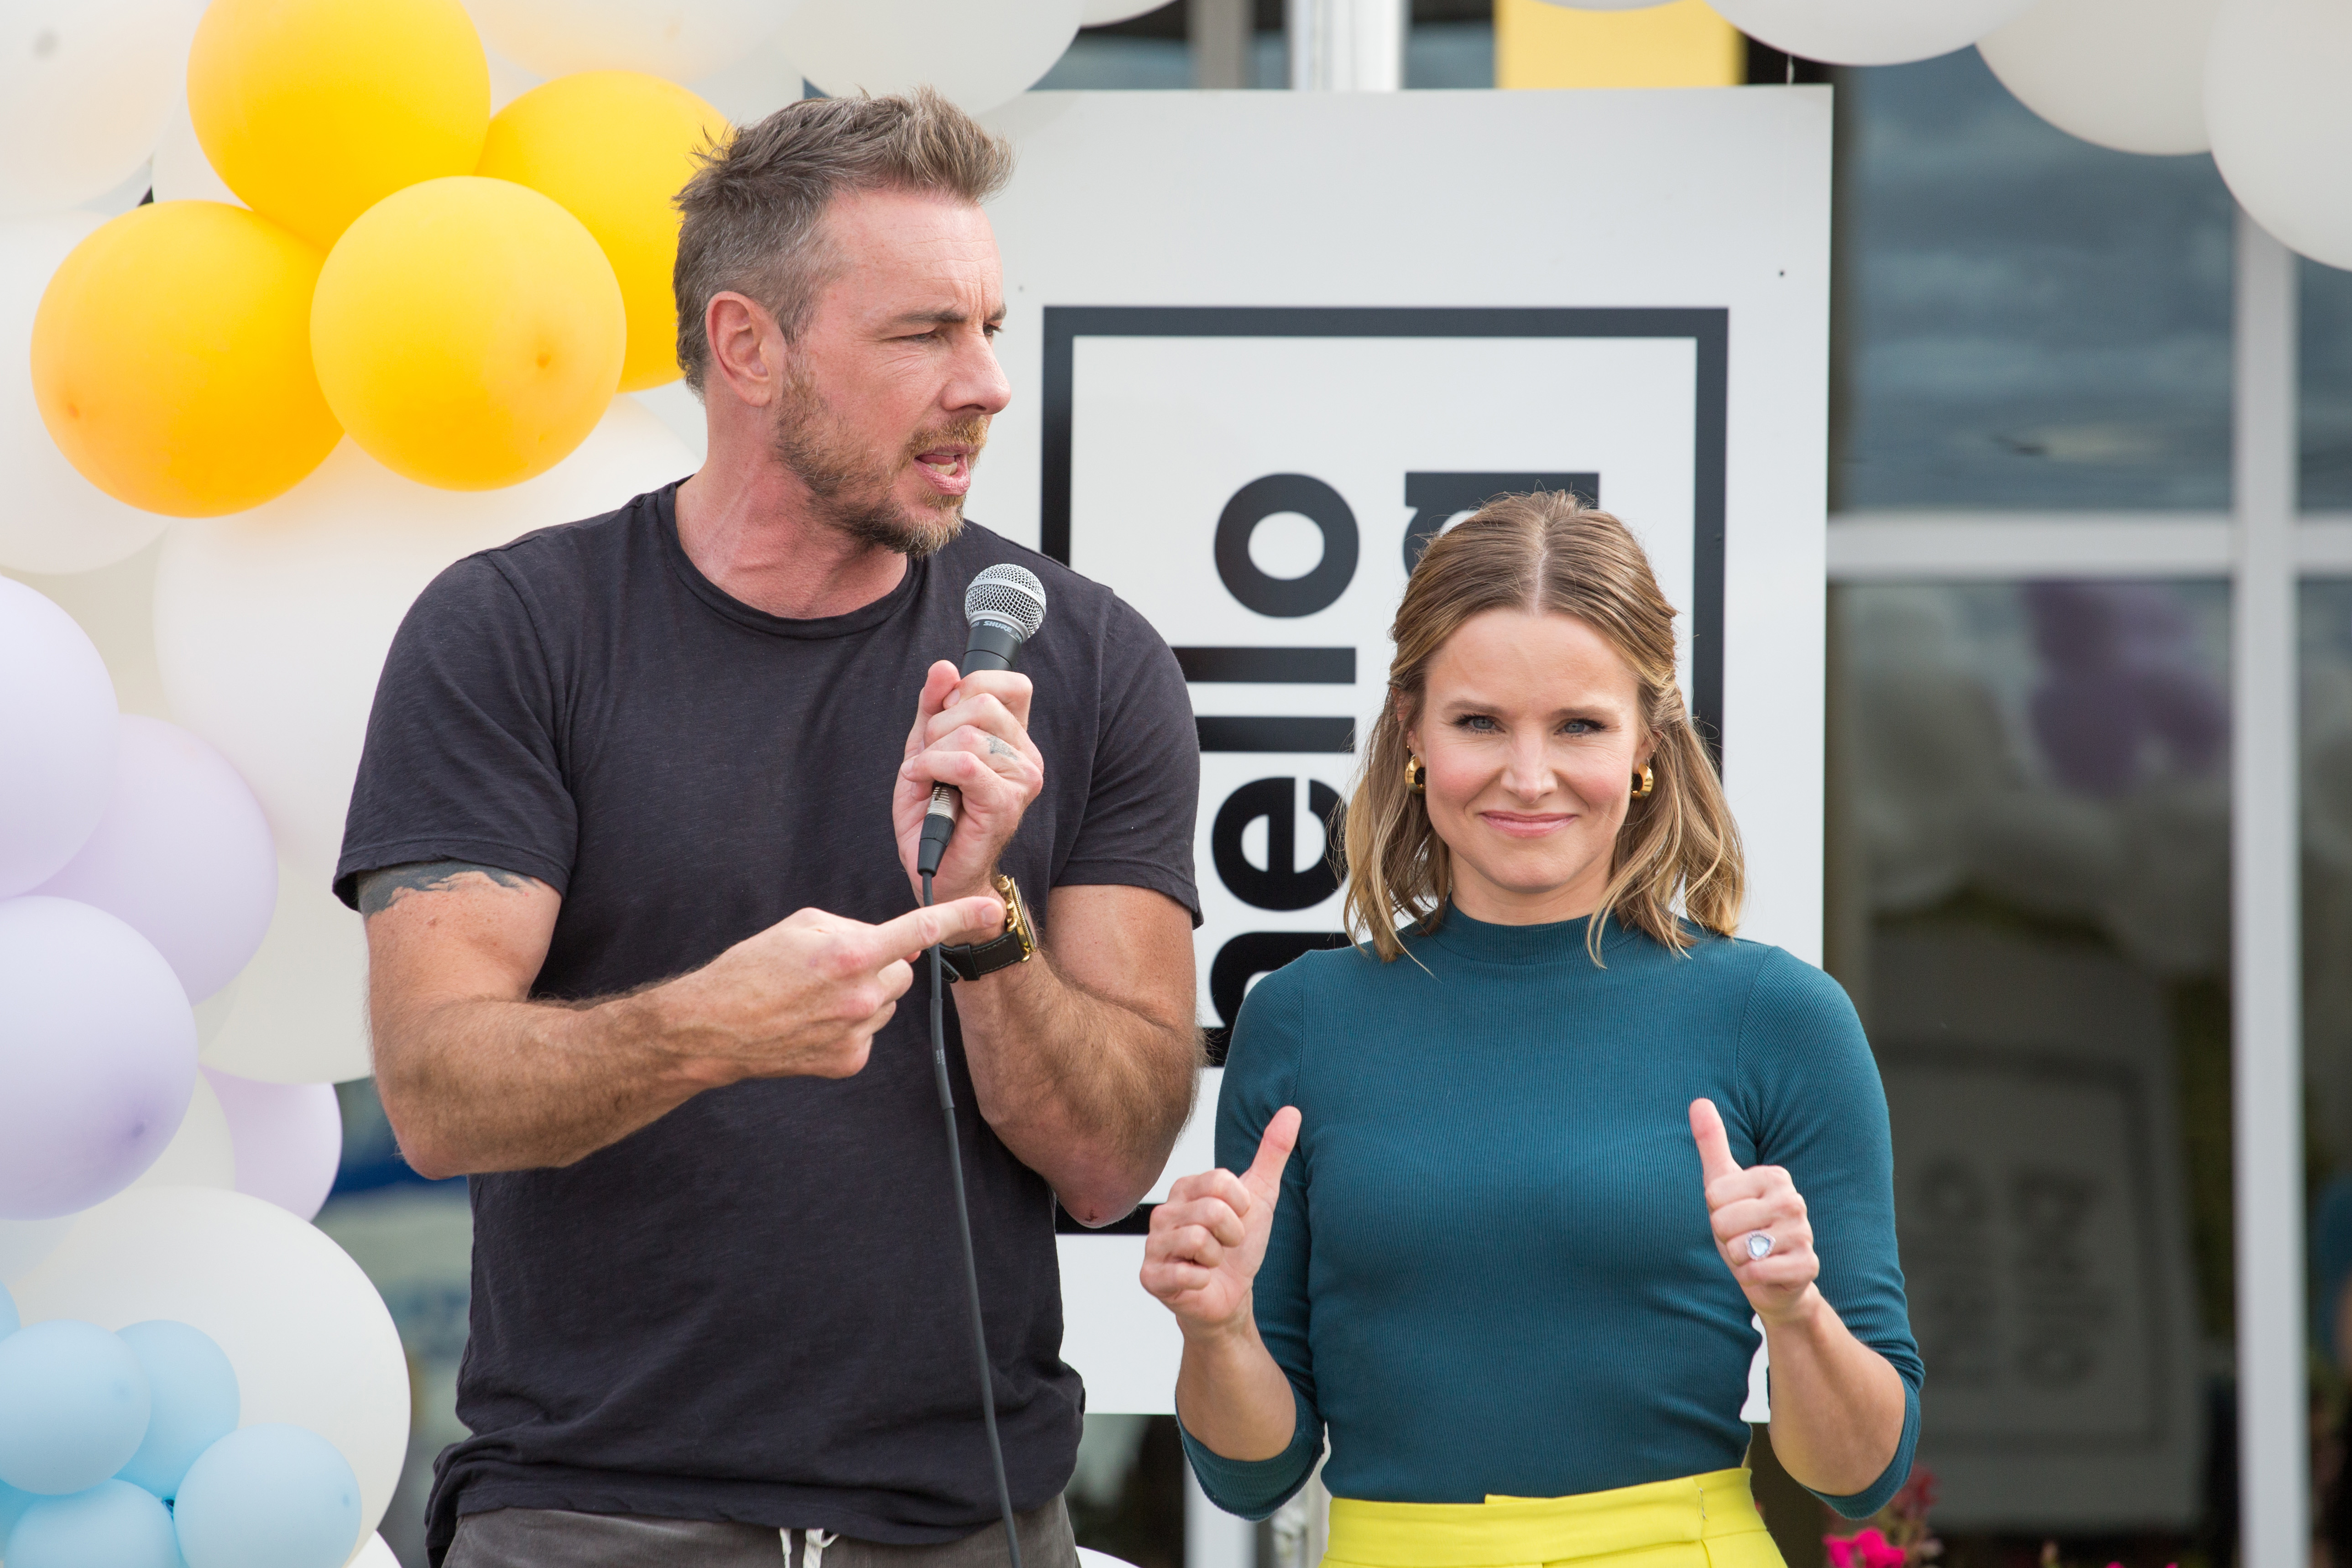 Dax Shepard and Kristen Bell attend the grand opening of Hello Bello’s first wholly-owned U.S. diaper distribution and manufacturing center, on October 26, 2021, in Waco, Texas. | Source: Getty Images